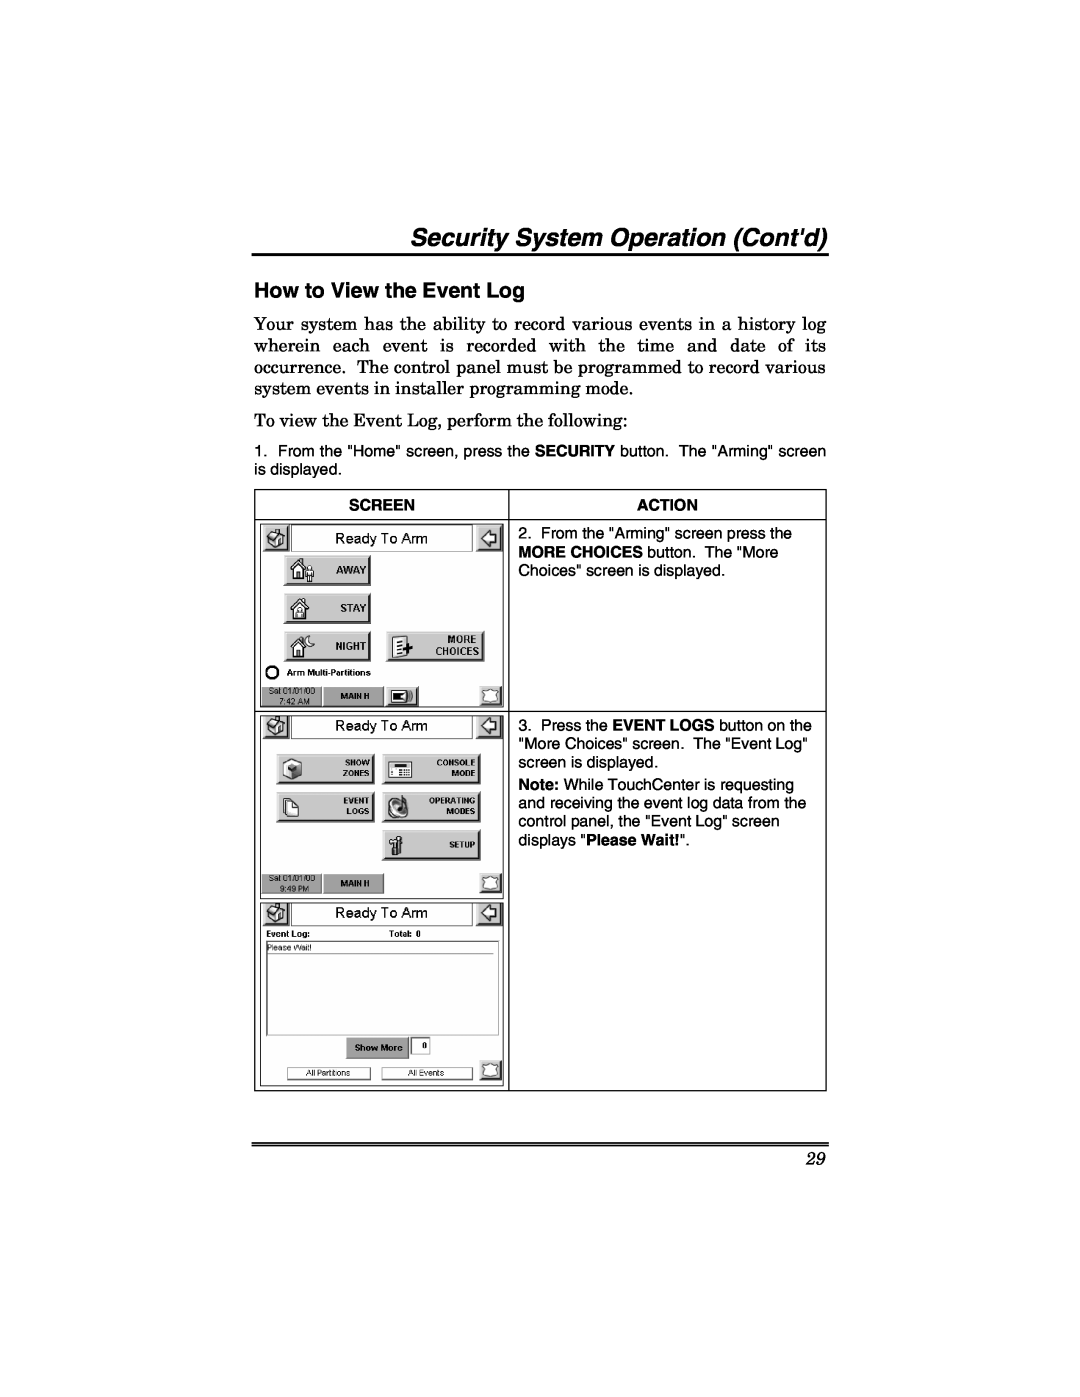 Honeywell 6271V manual How to View the Event Log, Security System Operation Contd 